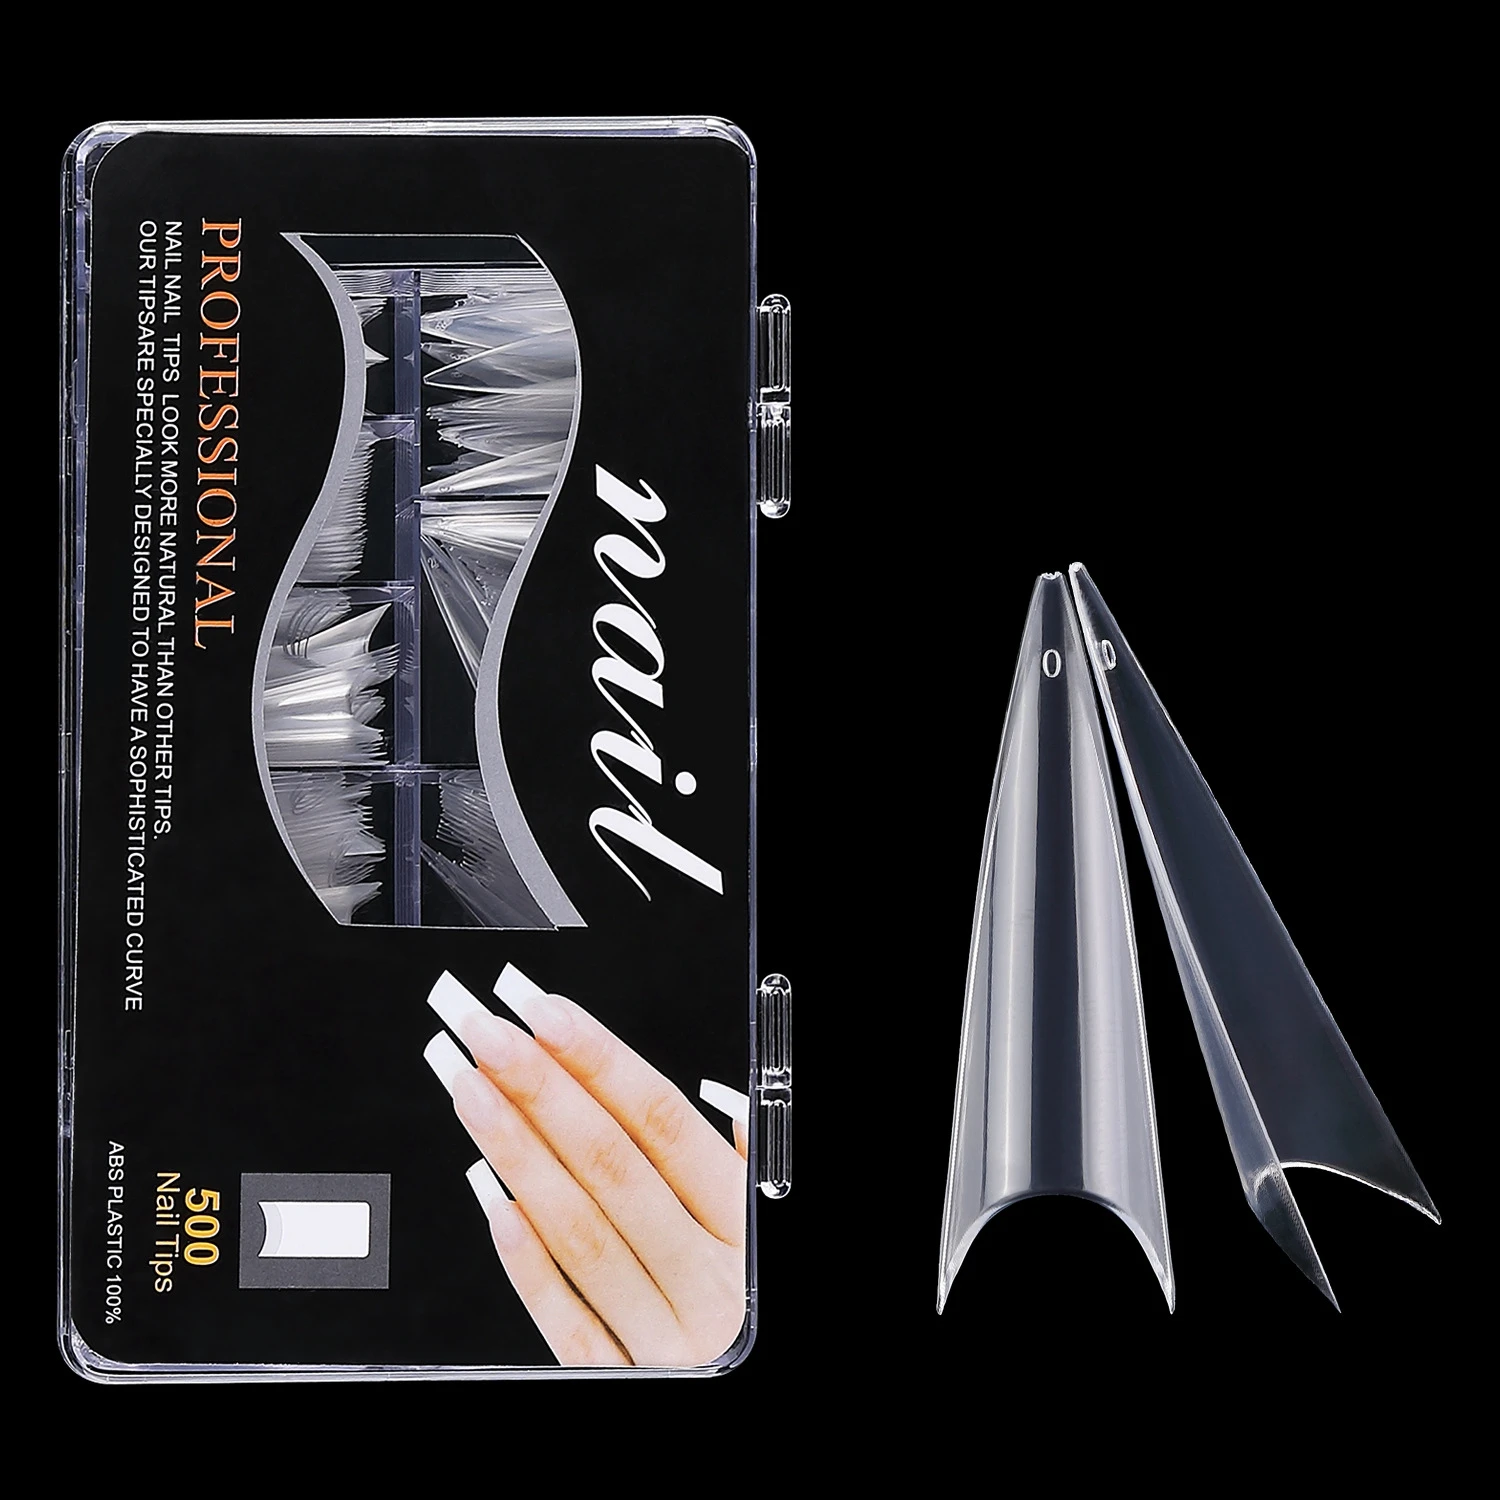 

Half Cover No Crease Clear Coffin Extended Design Acrylic 500pcs Salon Natural Artificial Fale French Long Stiletto Nail Tips